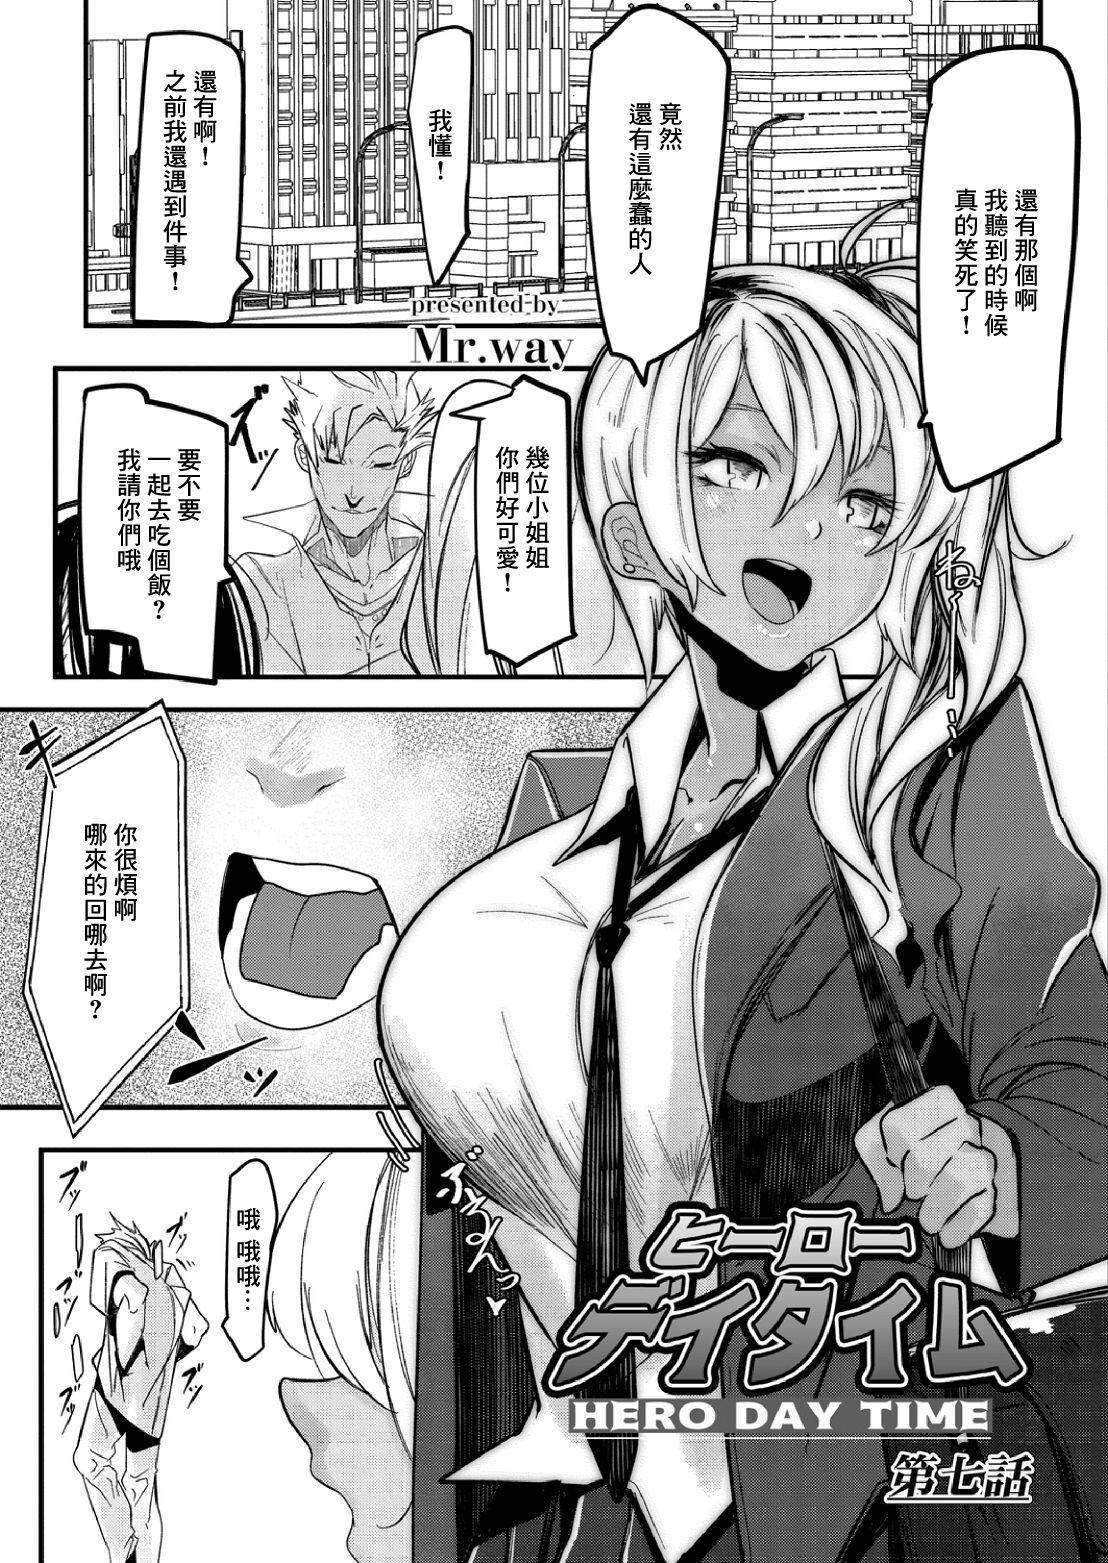 HERO DAY TIME Ch. 7 0